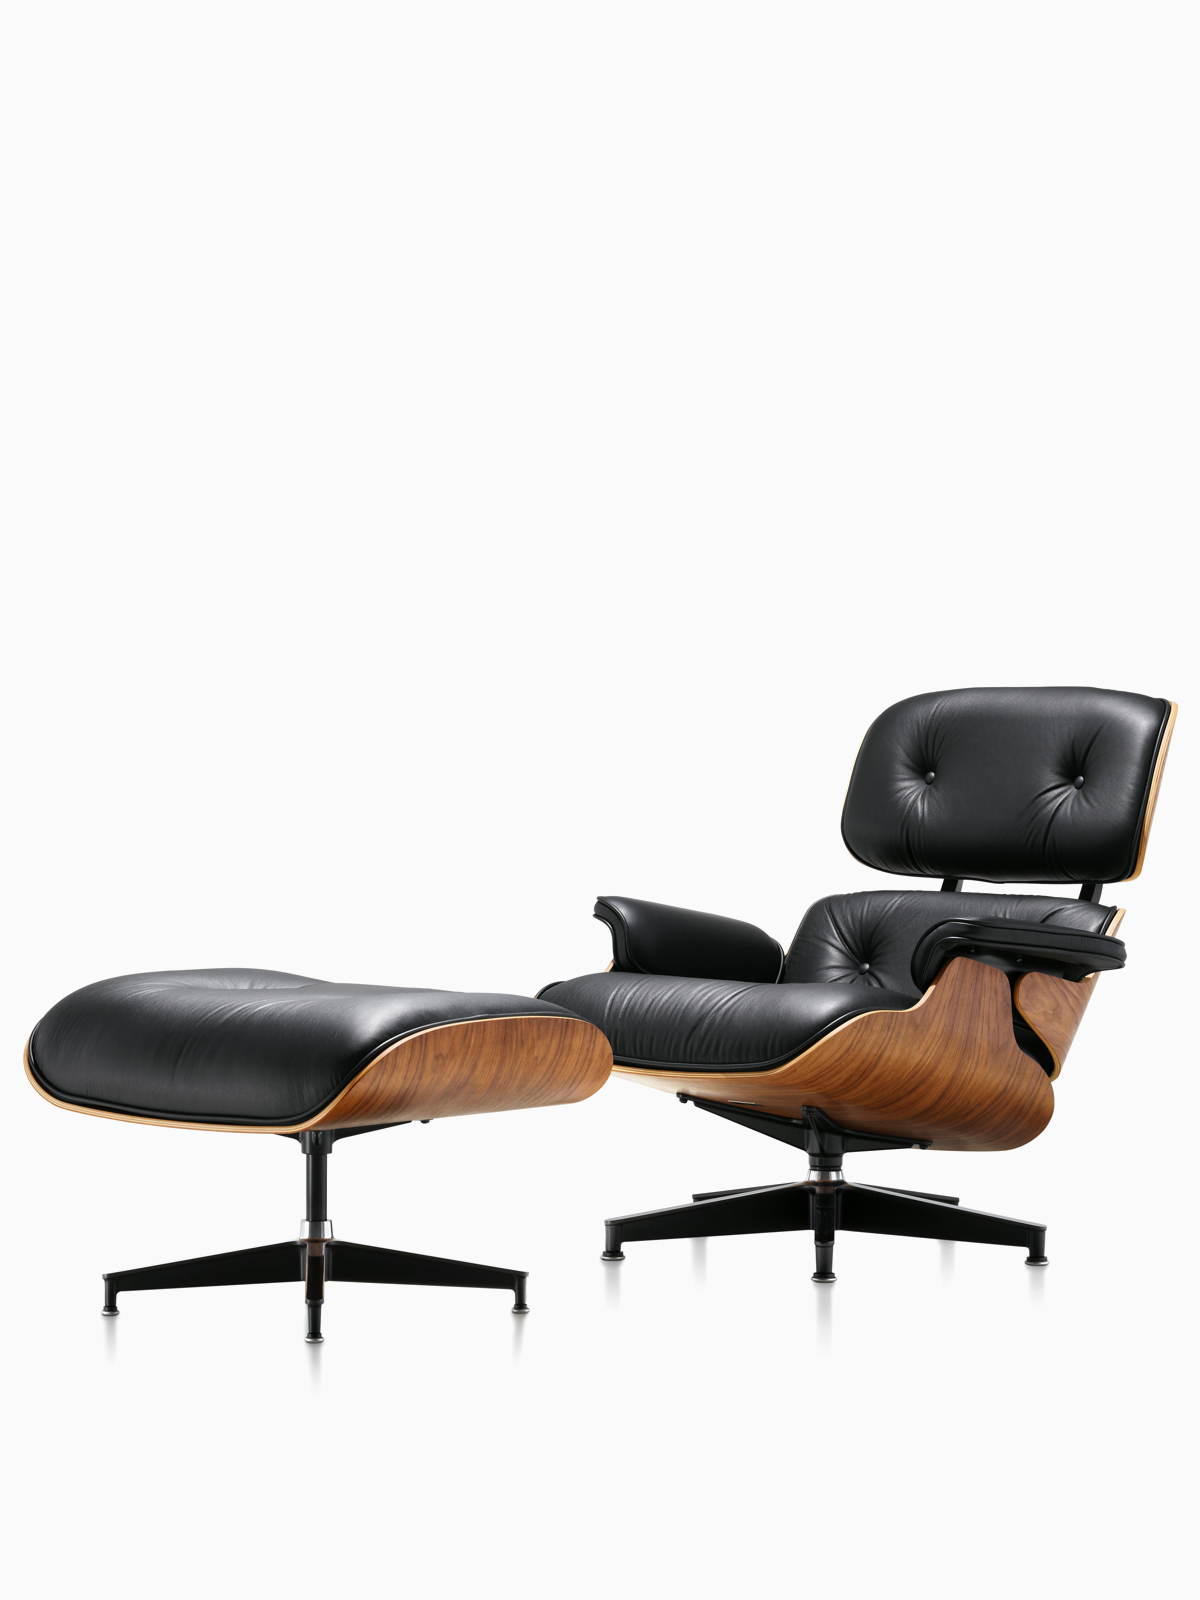 th_prd_eames_lounge_chair_and_ottoman_lo